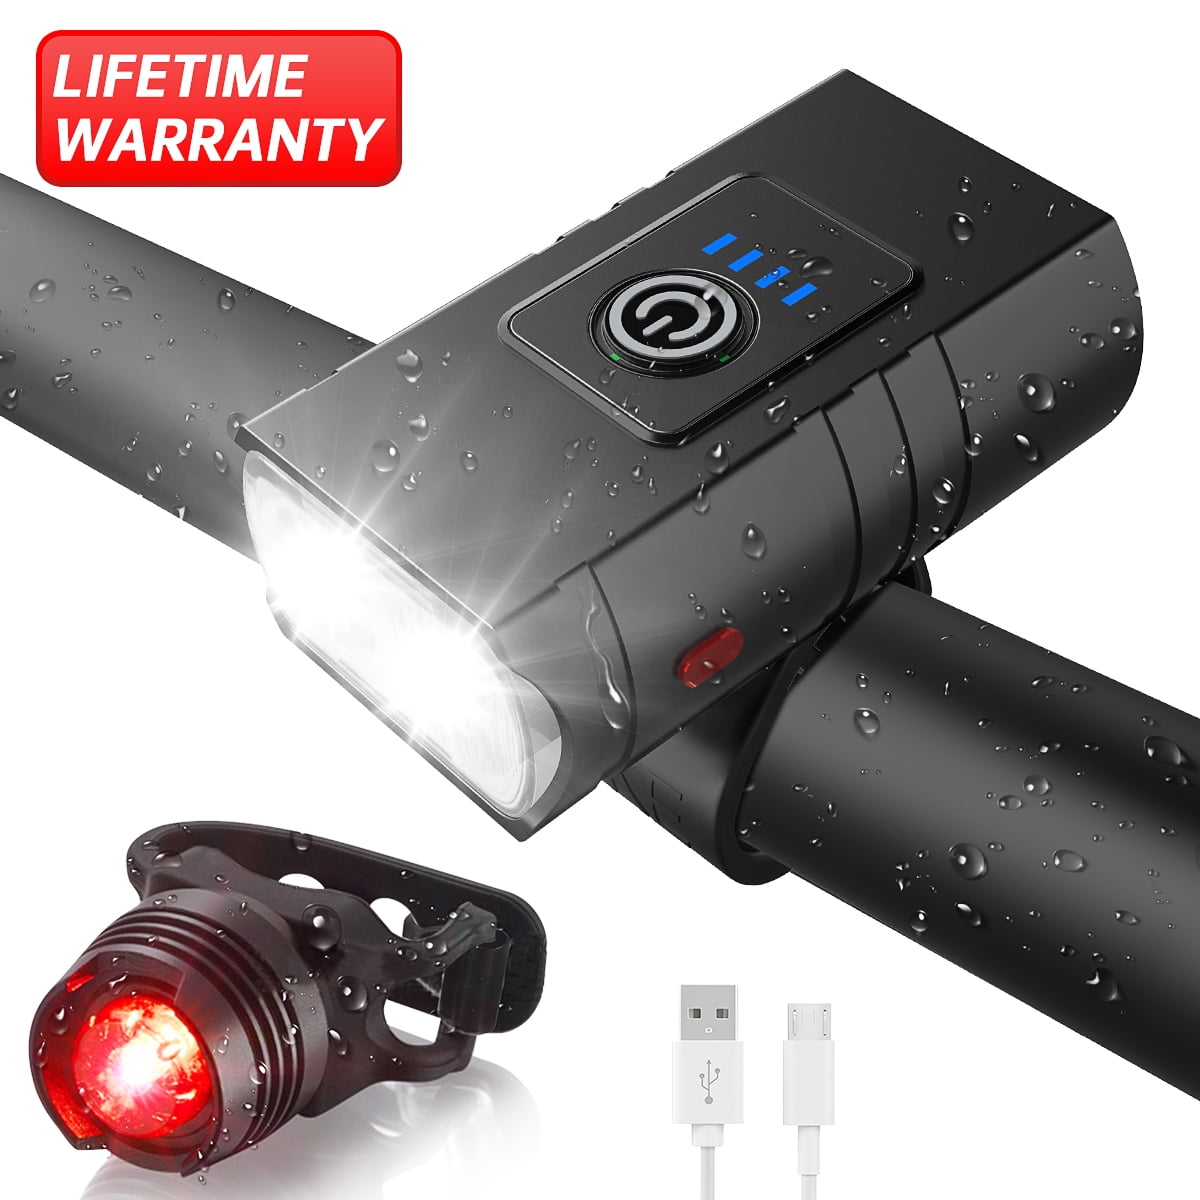 USB Rechargeable LED Bike Front Light Headlamp Rear Taillight Waterproof 3 Modes 